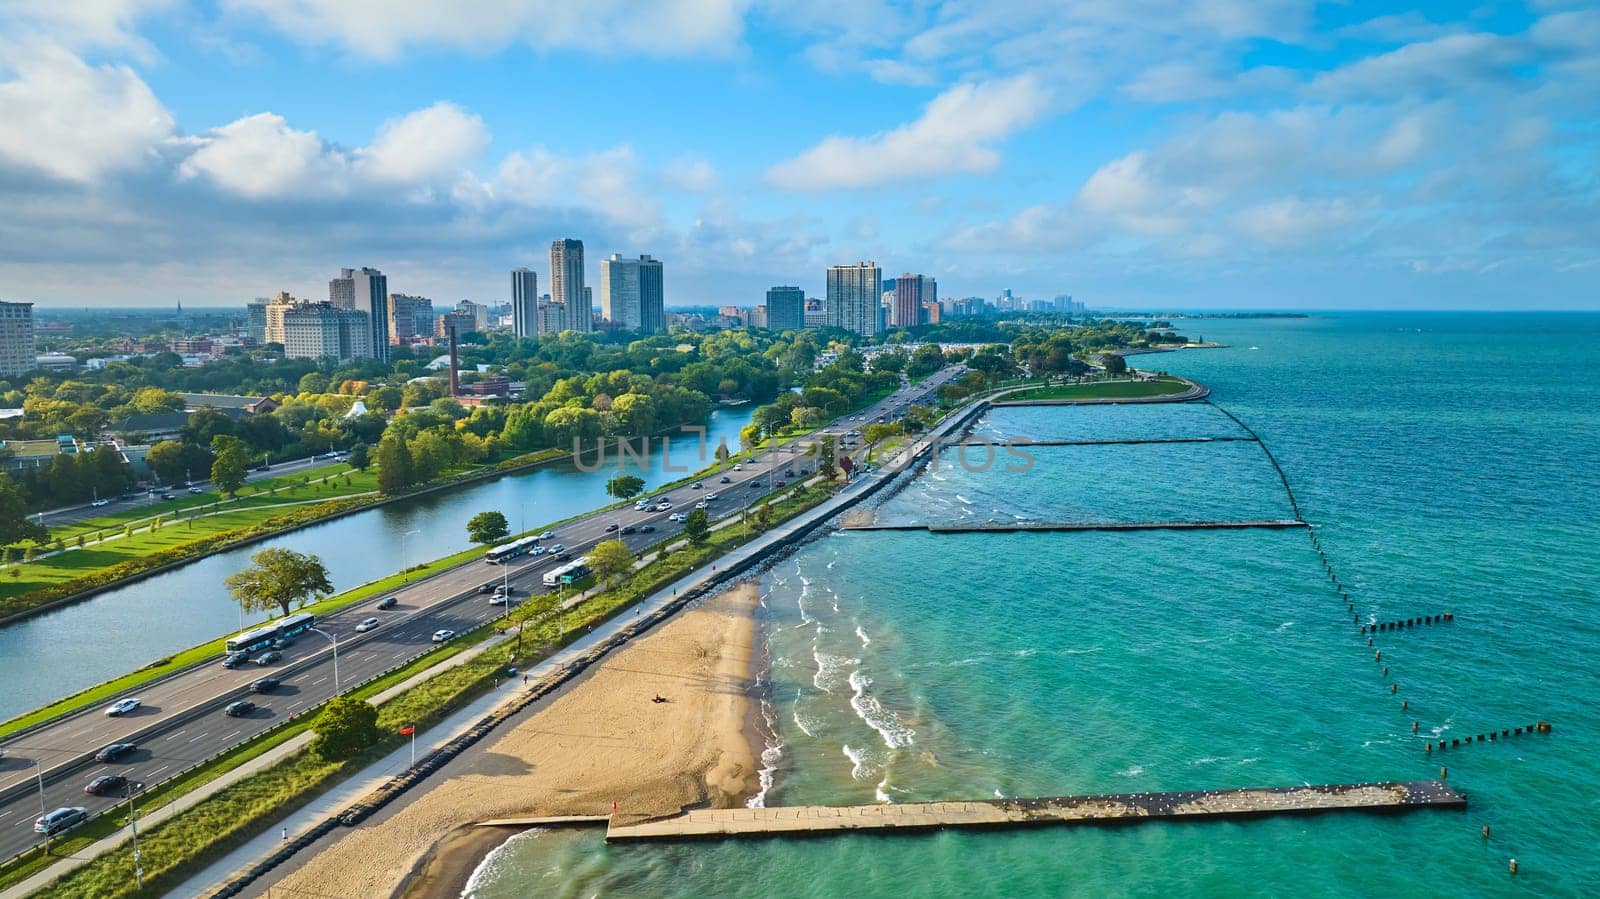 Tourism sandy beach along coast for Chicago travel aerial beside Lake Michigan on summer day by njproductions